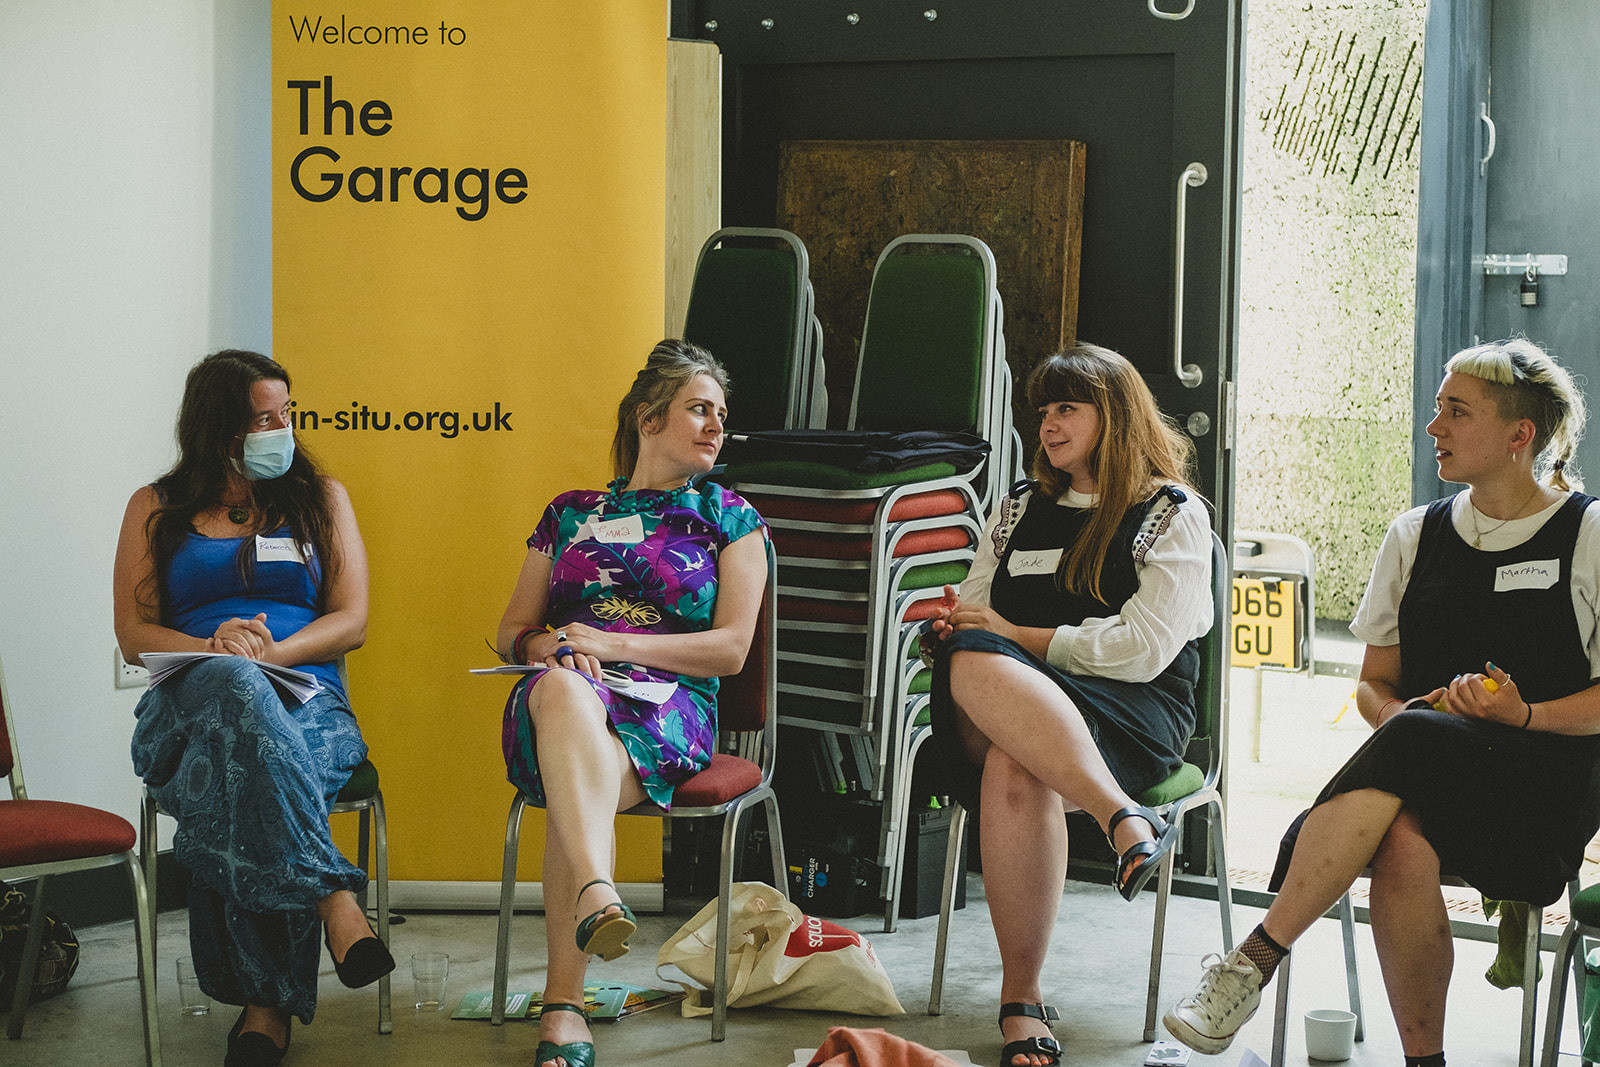 Four women sit on chairs, socially distanced from one another. Behind them is a yellow banner with the words "Welcome to The Garage" and "www.In-Situ.org.uk"